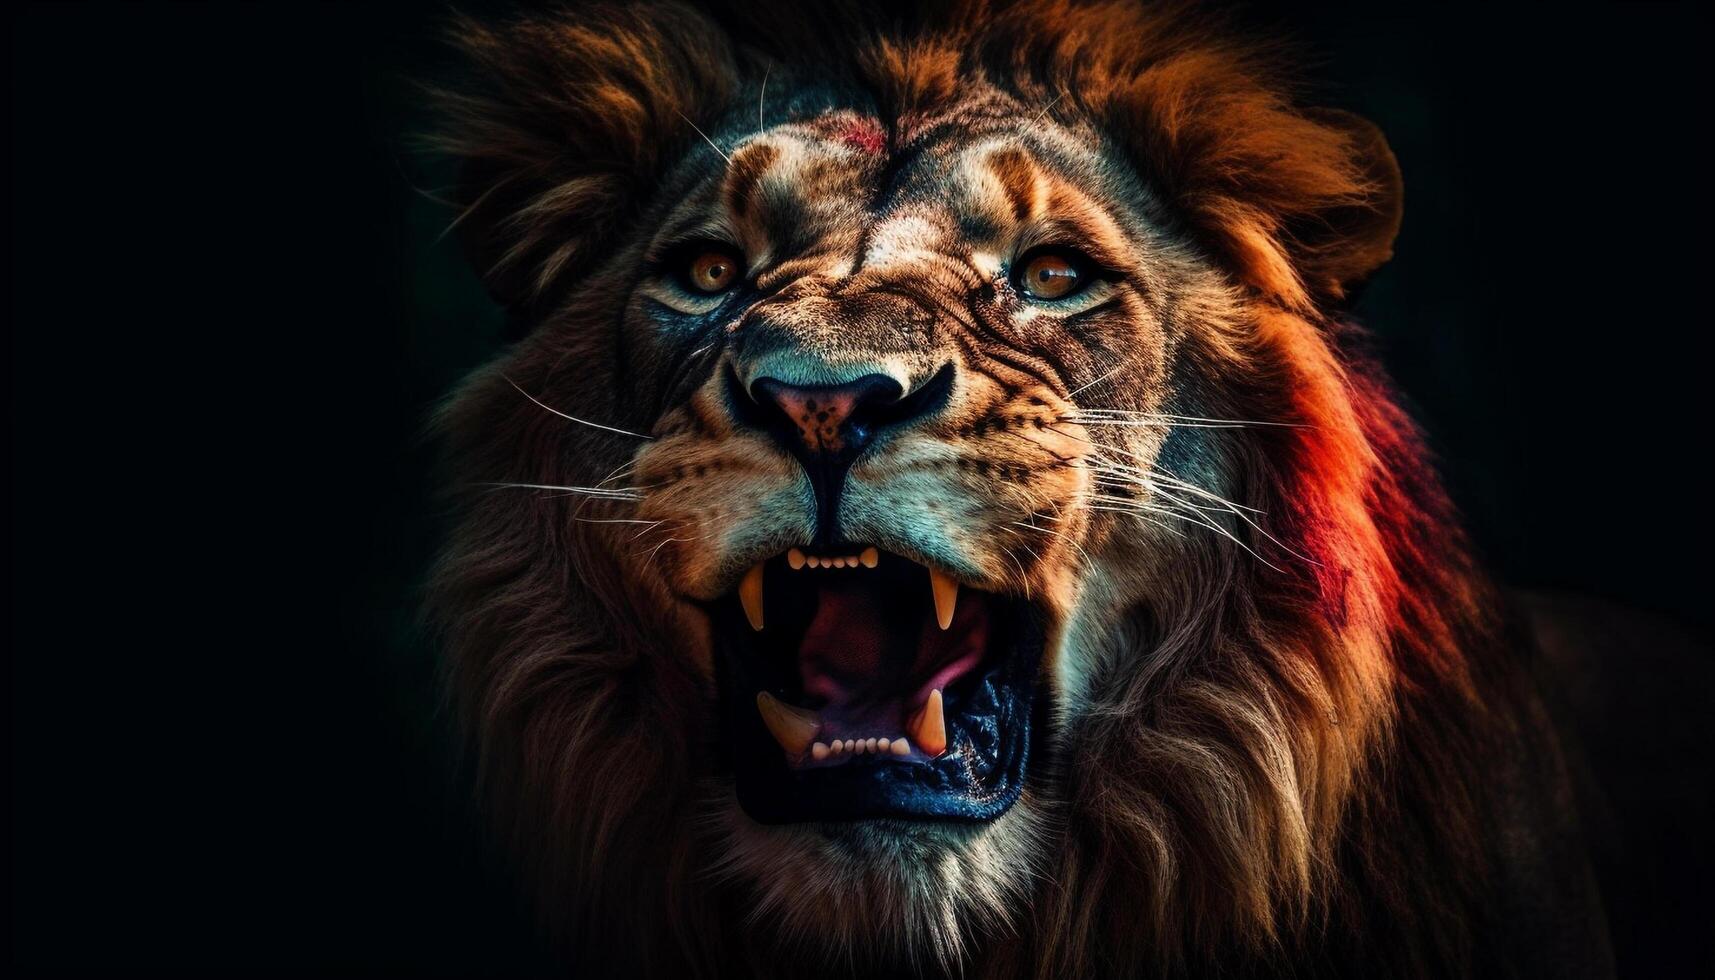 Angry Lion Background Wallpaper 76038 - Baltana